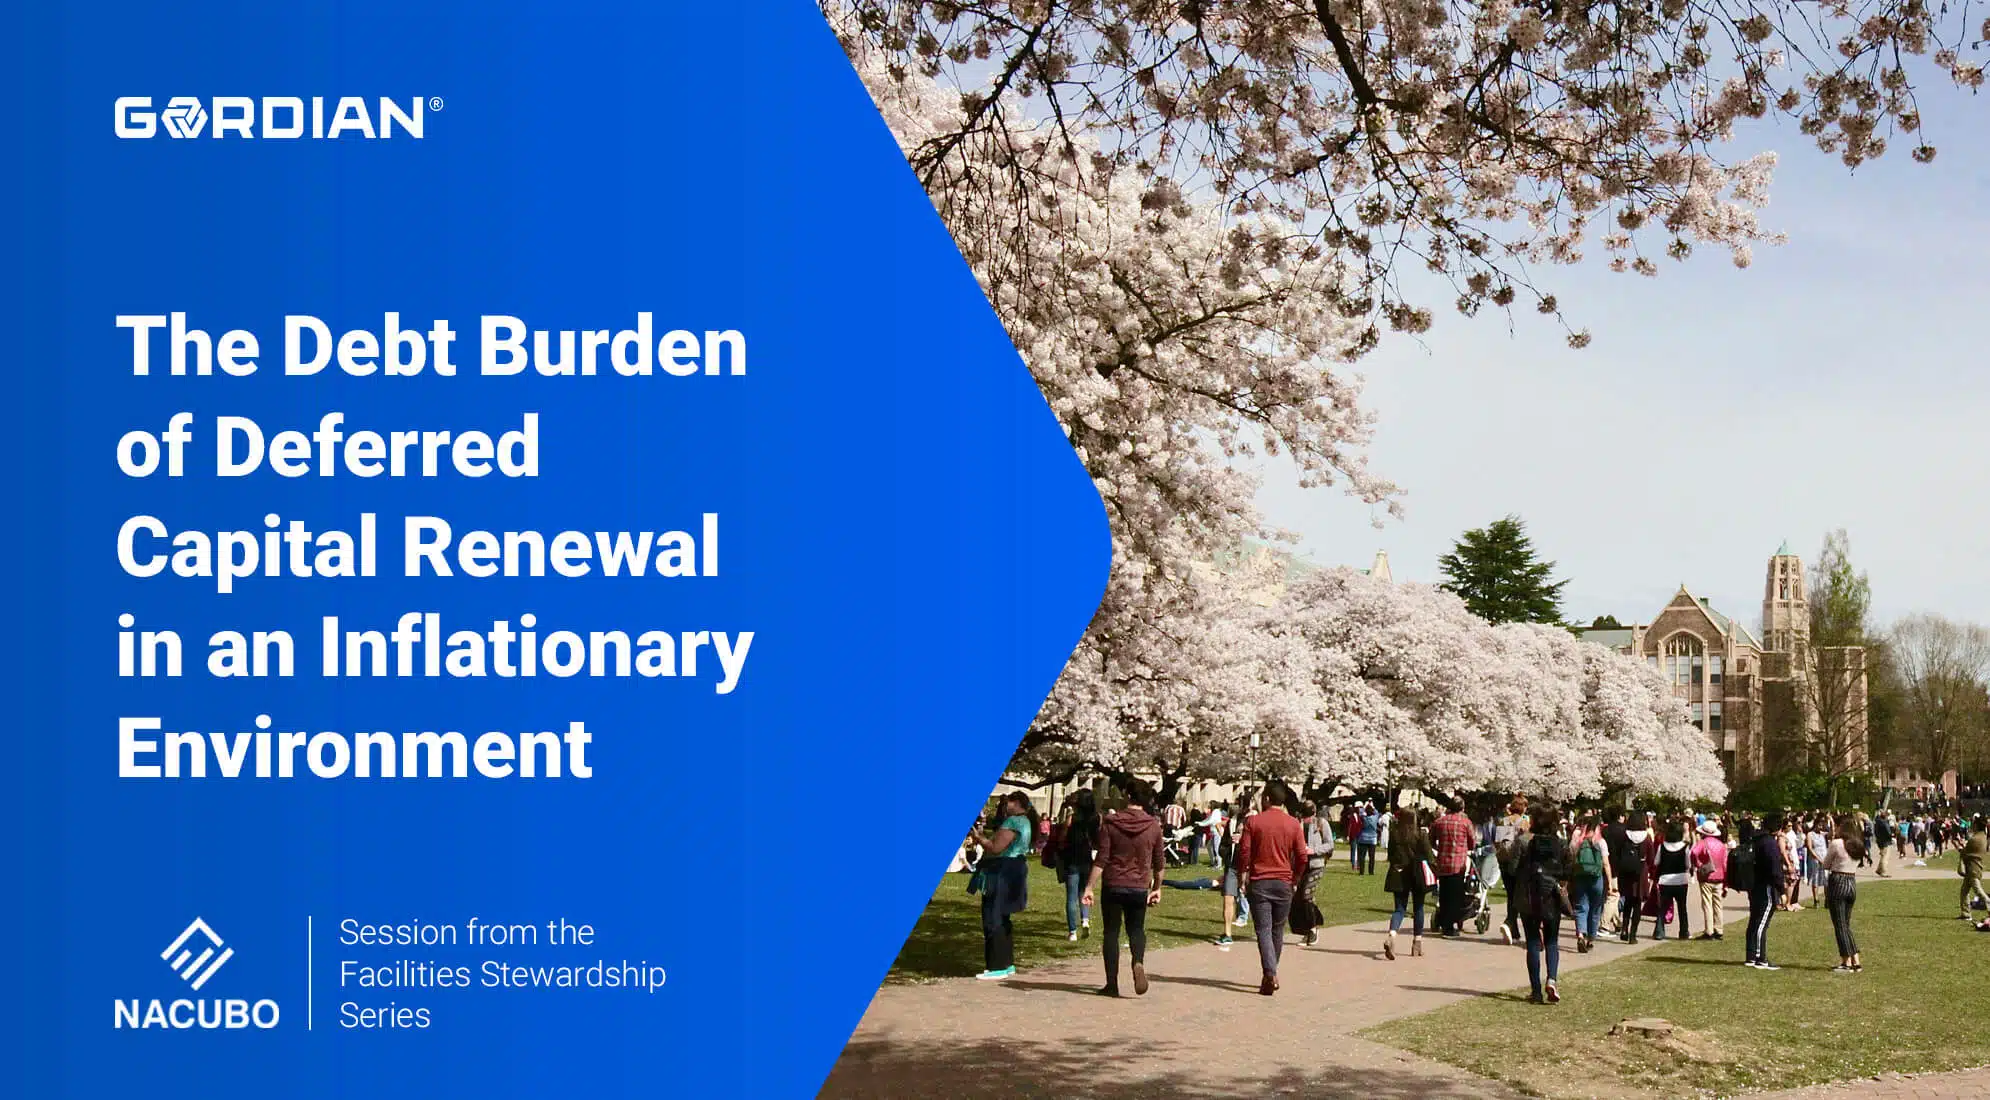 Facilities Stewardship Series: The Debt Burden of Deferred Capital Renewal in an Inflationary Environment 1